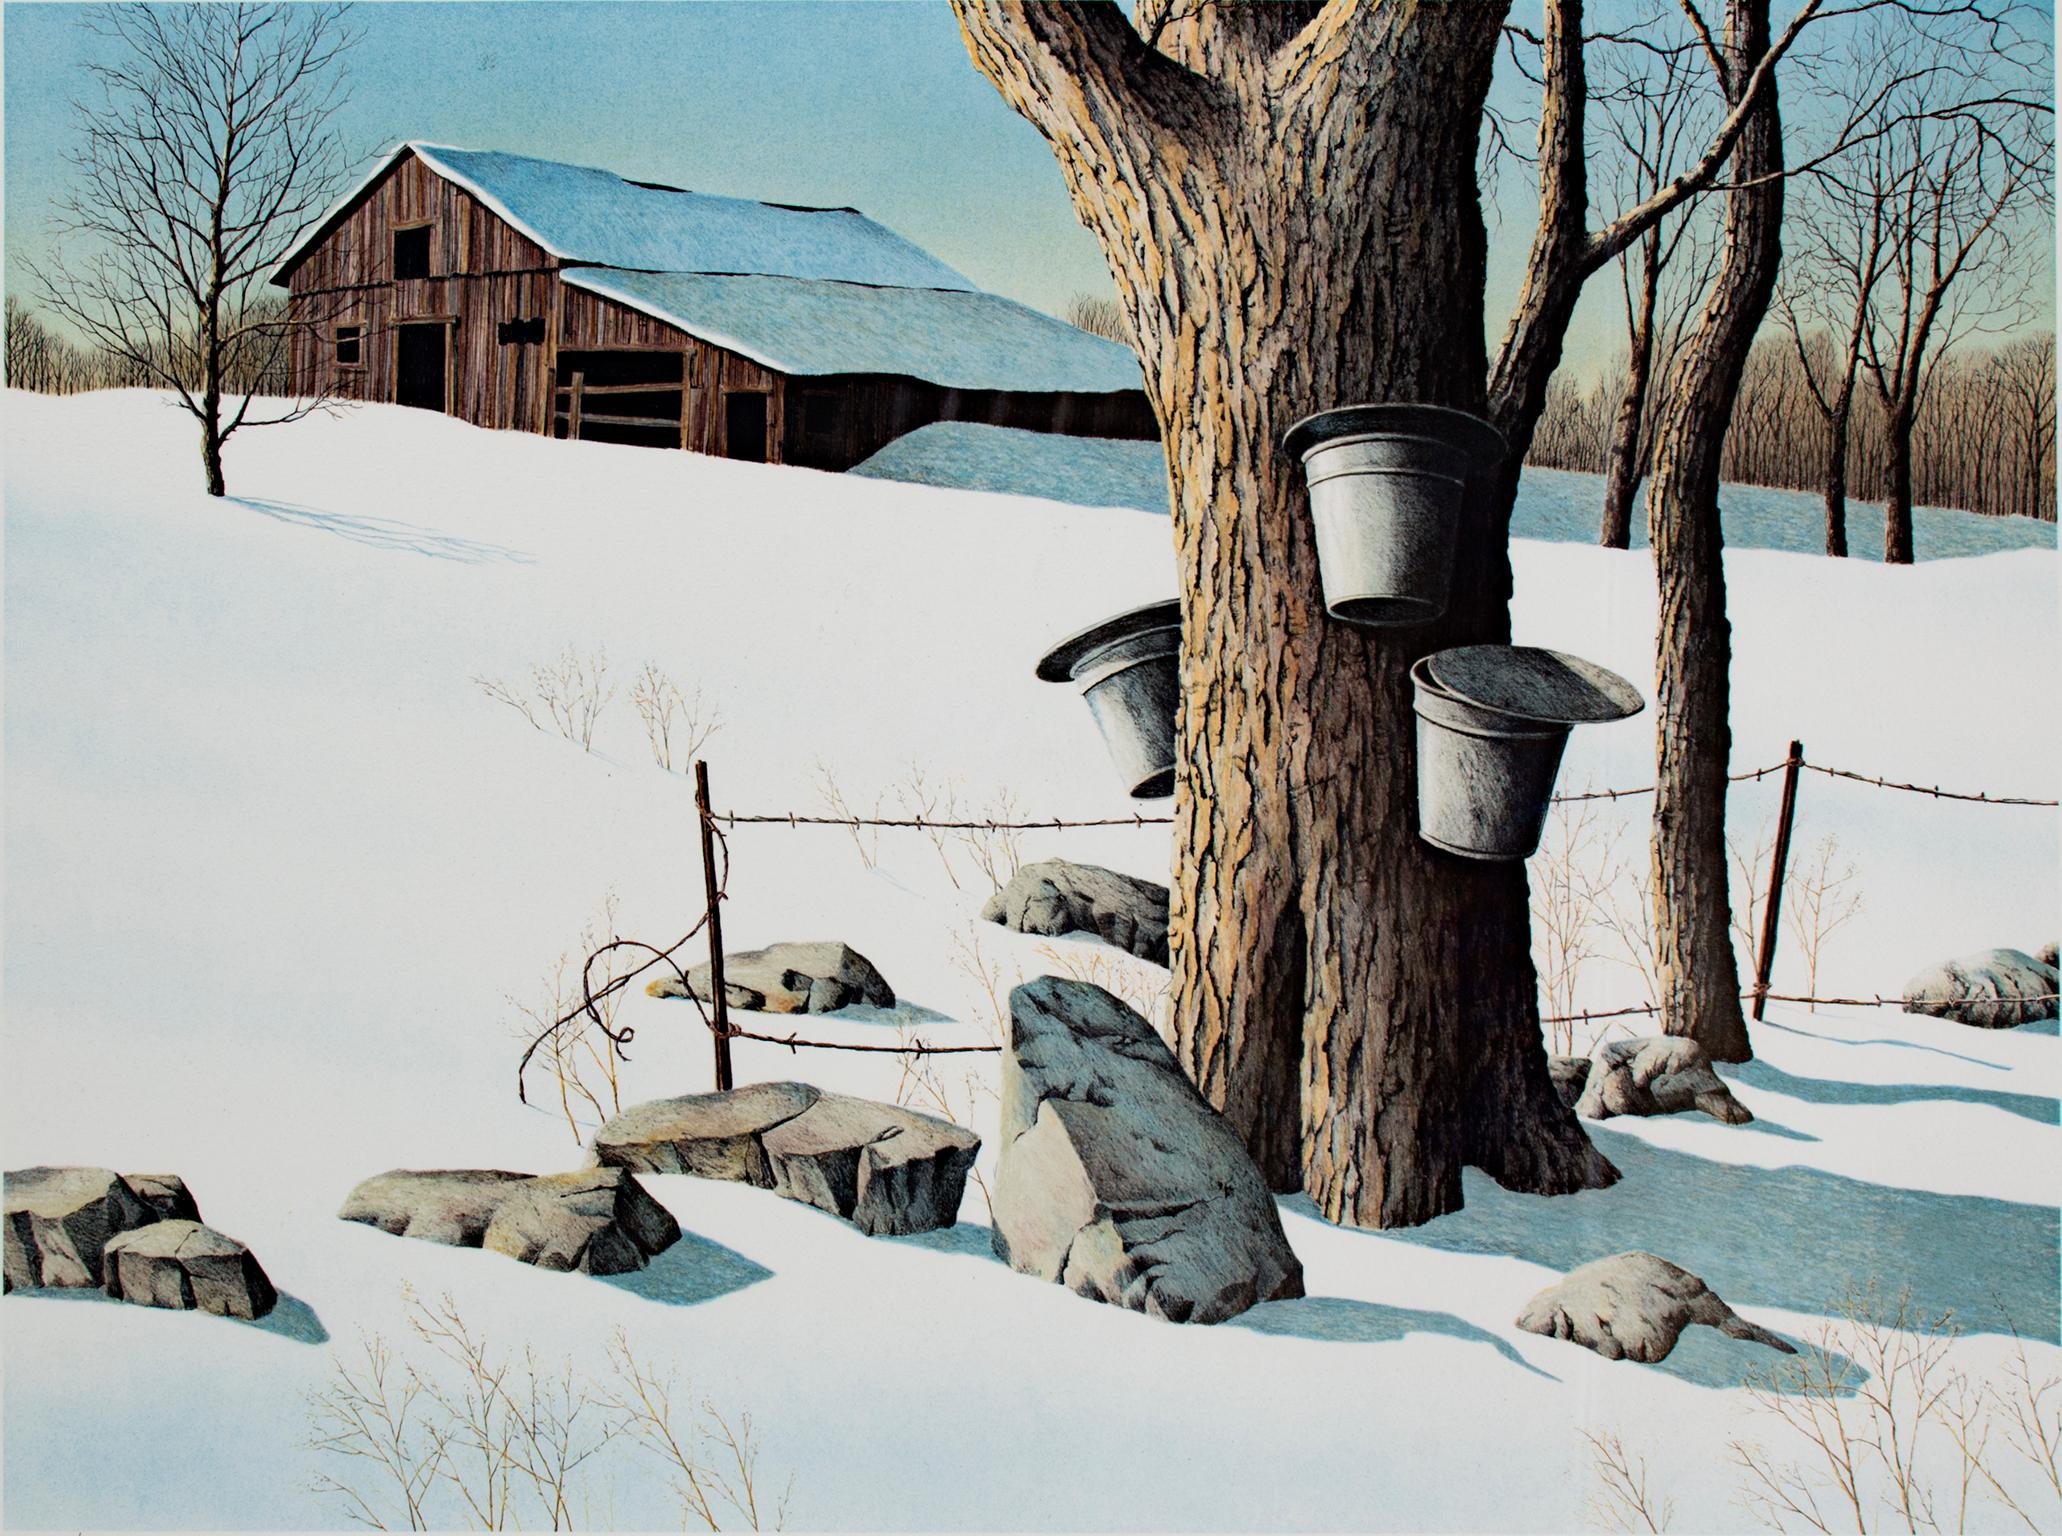 Helen Rundell Landscape Print - "Sugaring Off, " Original Color Lithograph Winter Farm Landscape by H. Rundell